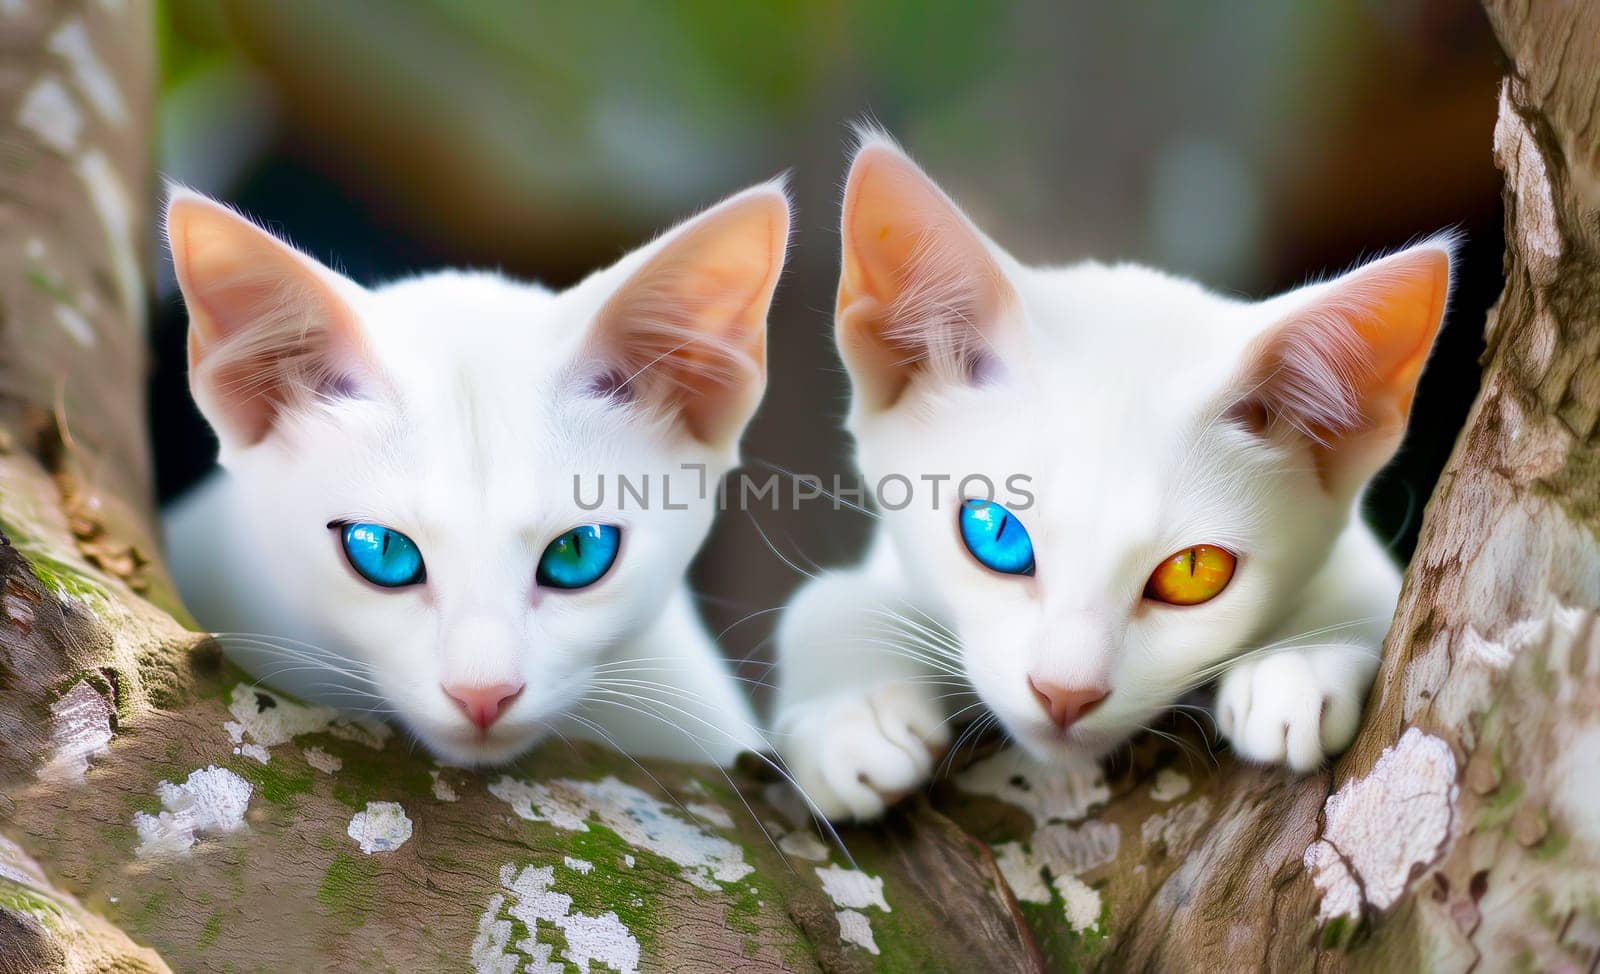 Closeup Portrait of Khao Manee White Cats, Kittens on Tree. Blue and Yellow Jewelry Eyes. Khao Plort, known as Diamond Eye Cat in Thailand. AI Generated. Horizontal Plane. National Cat Day